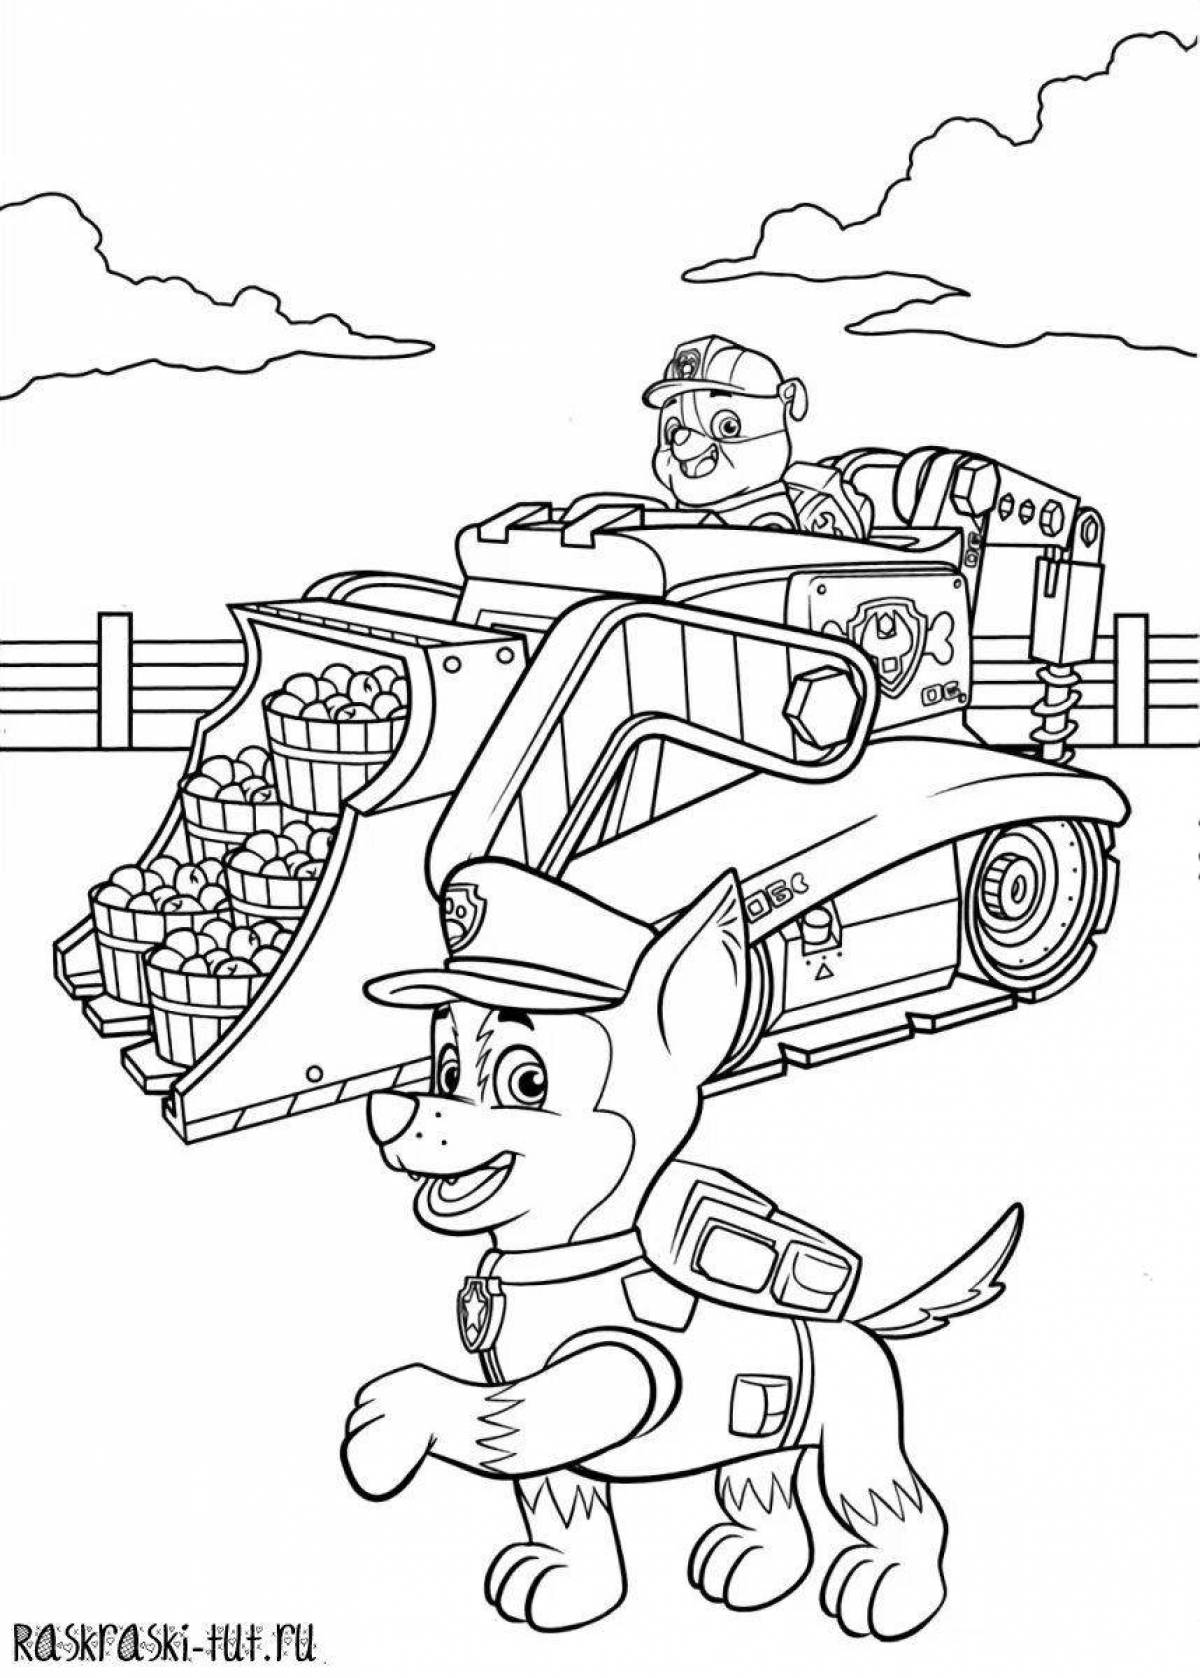 Coloring page shiny racer